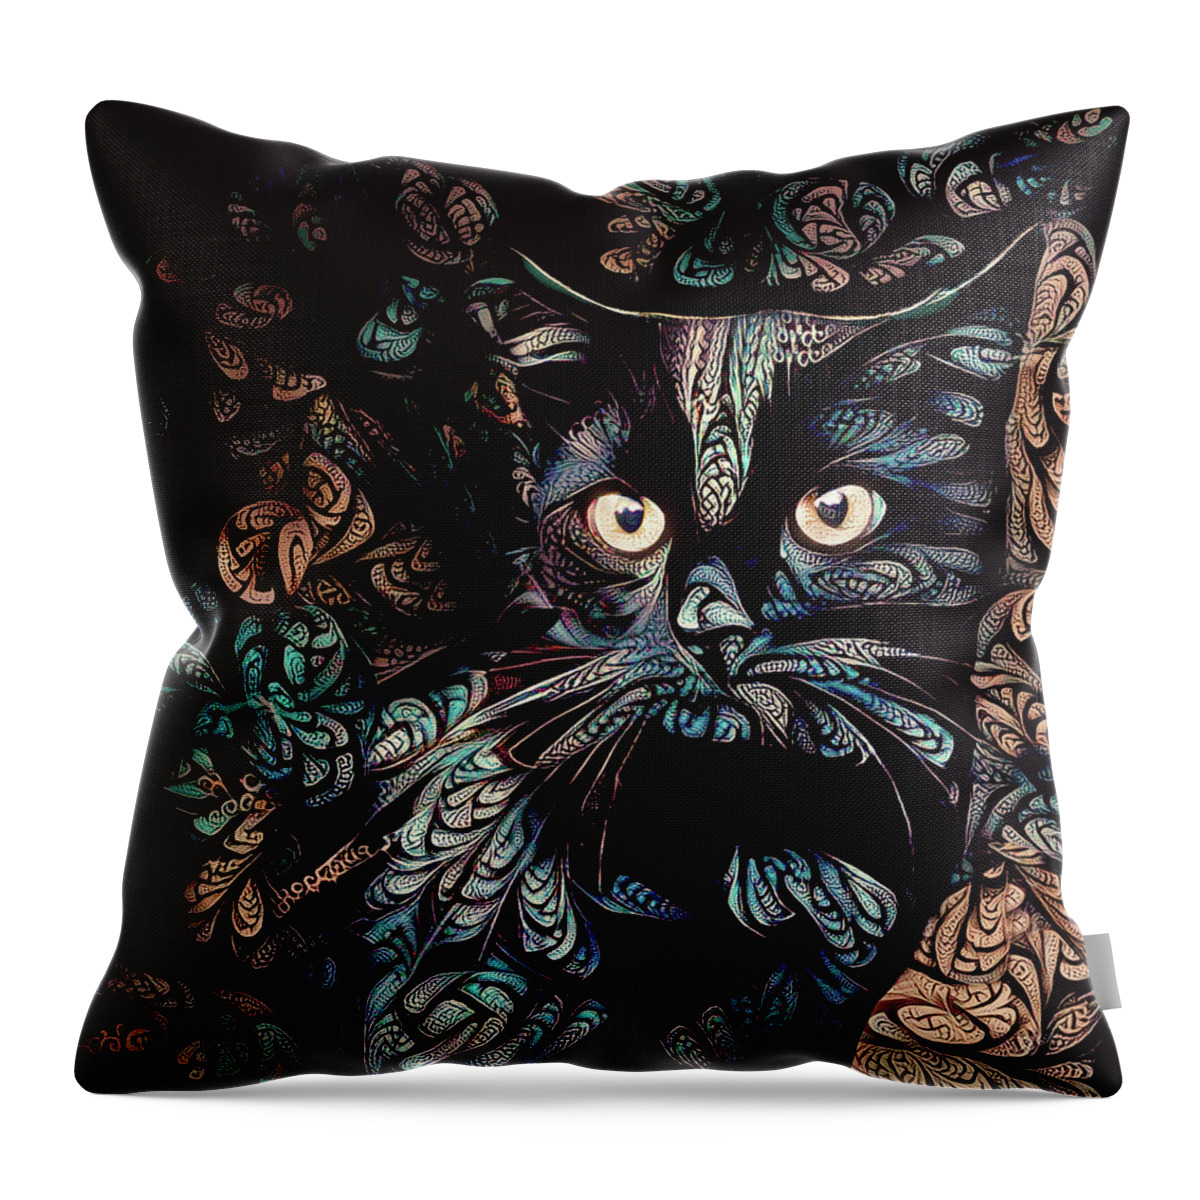 Black Cat Throw Pillow featuring the digital art Black Cat by Peggy Collins